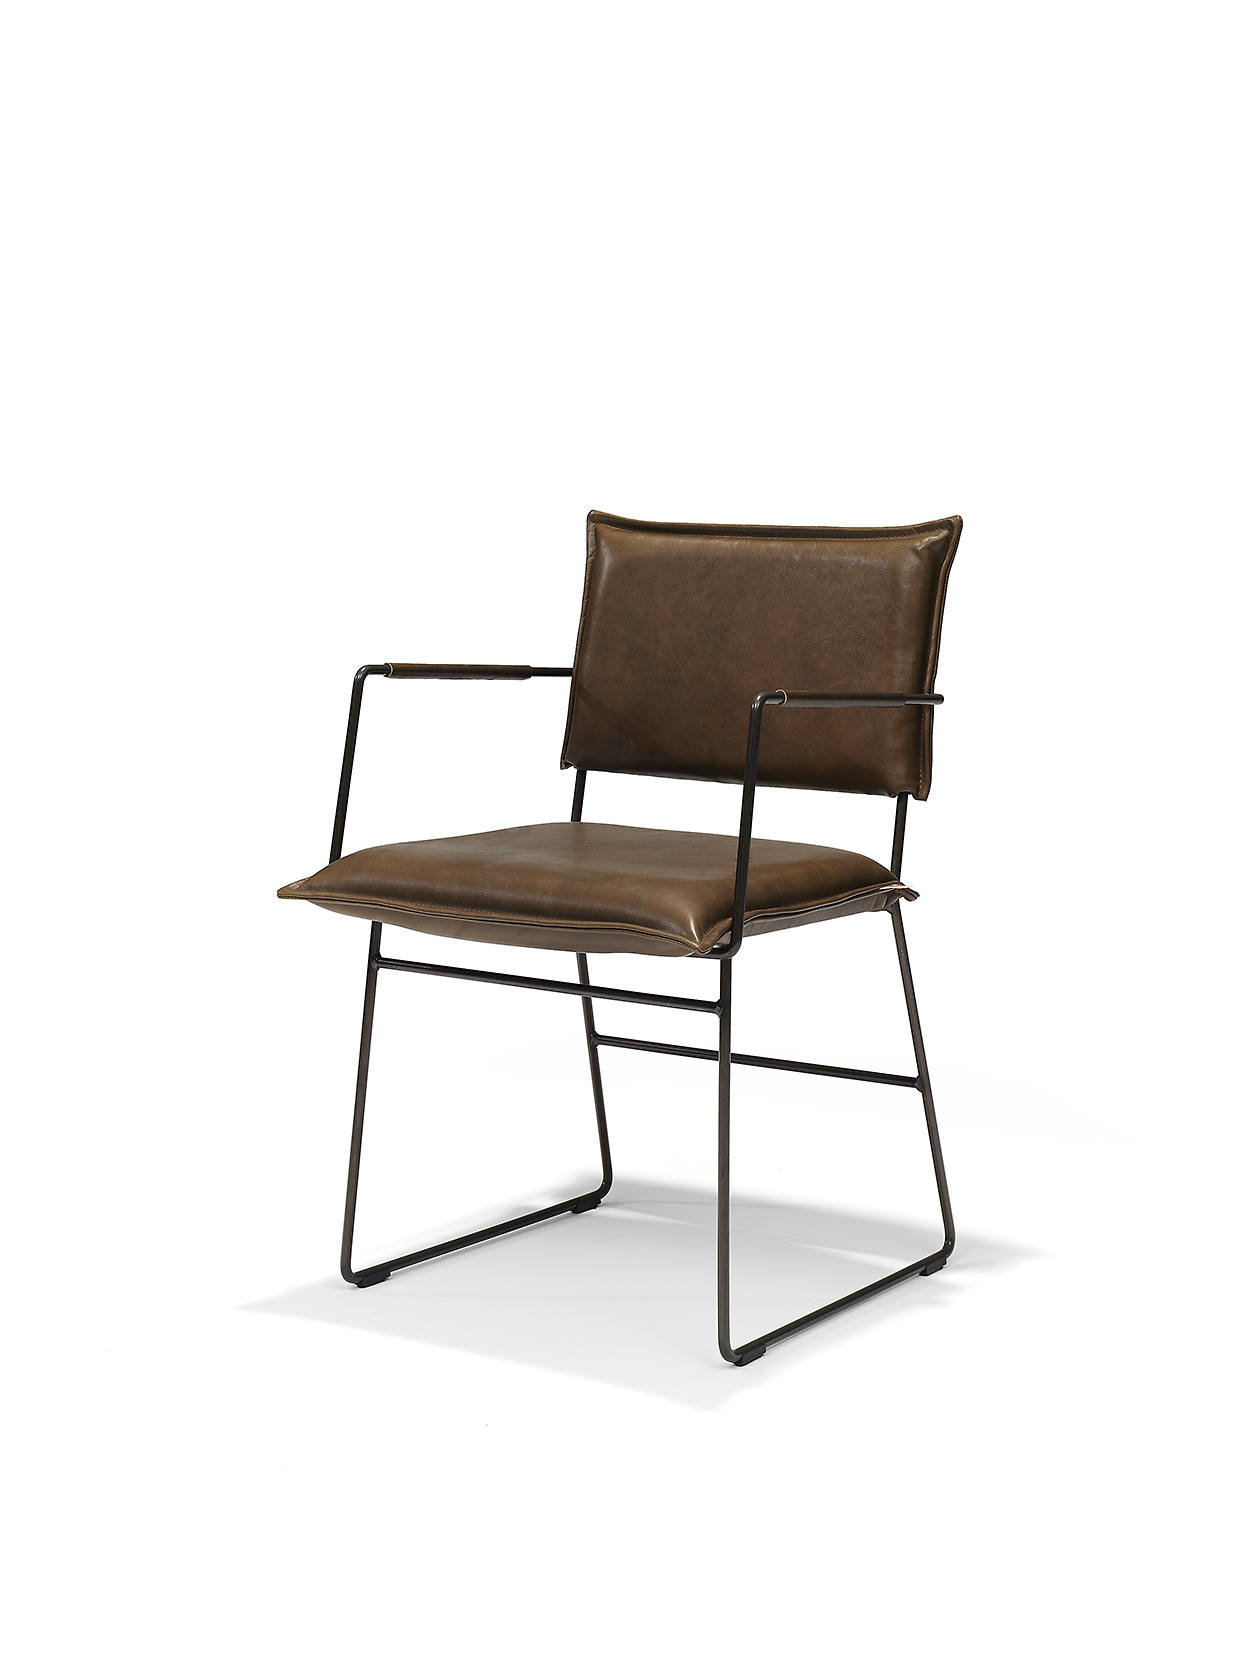 Norman Chair With Arm Luxor Fango Pers LR